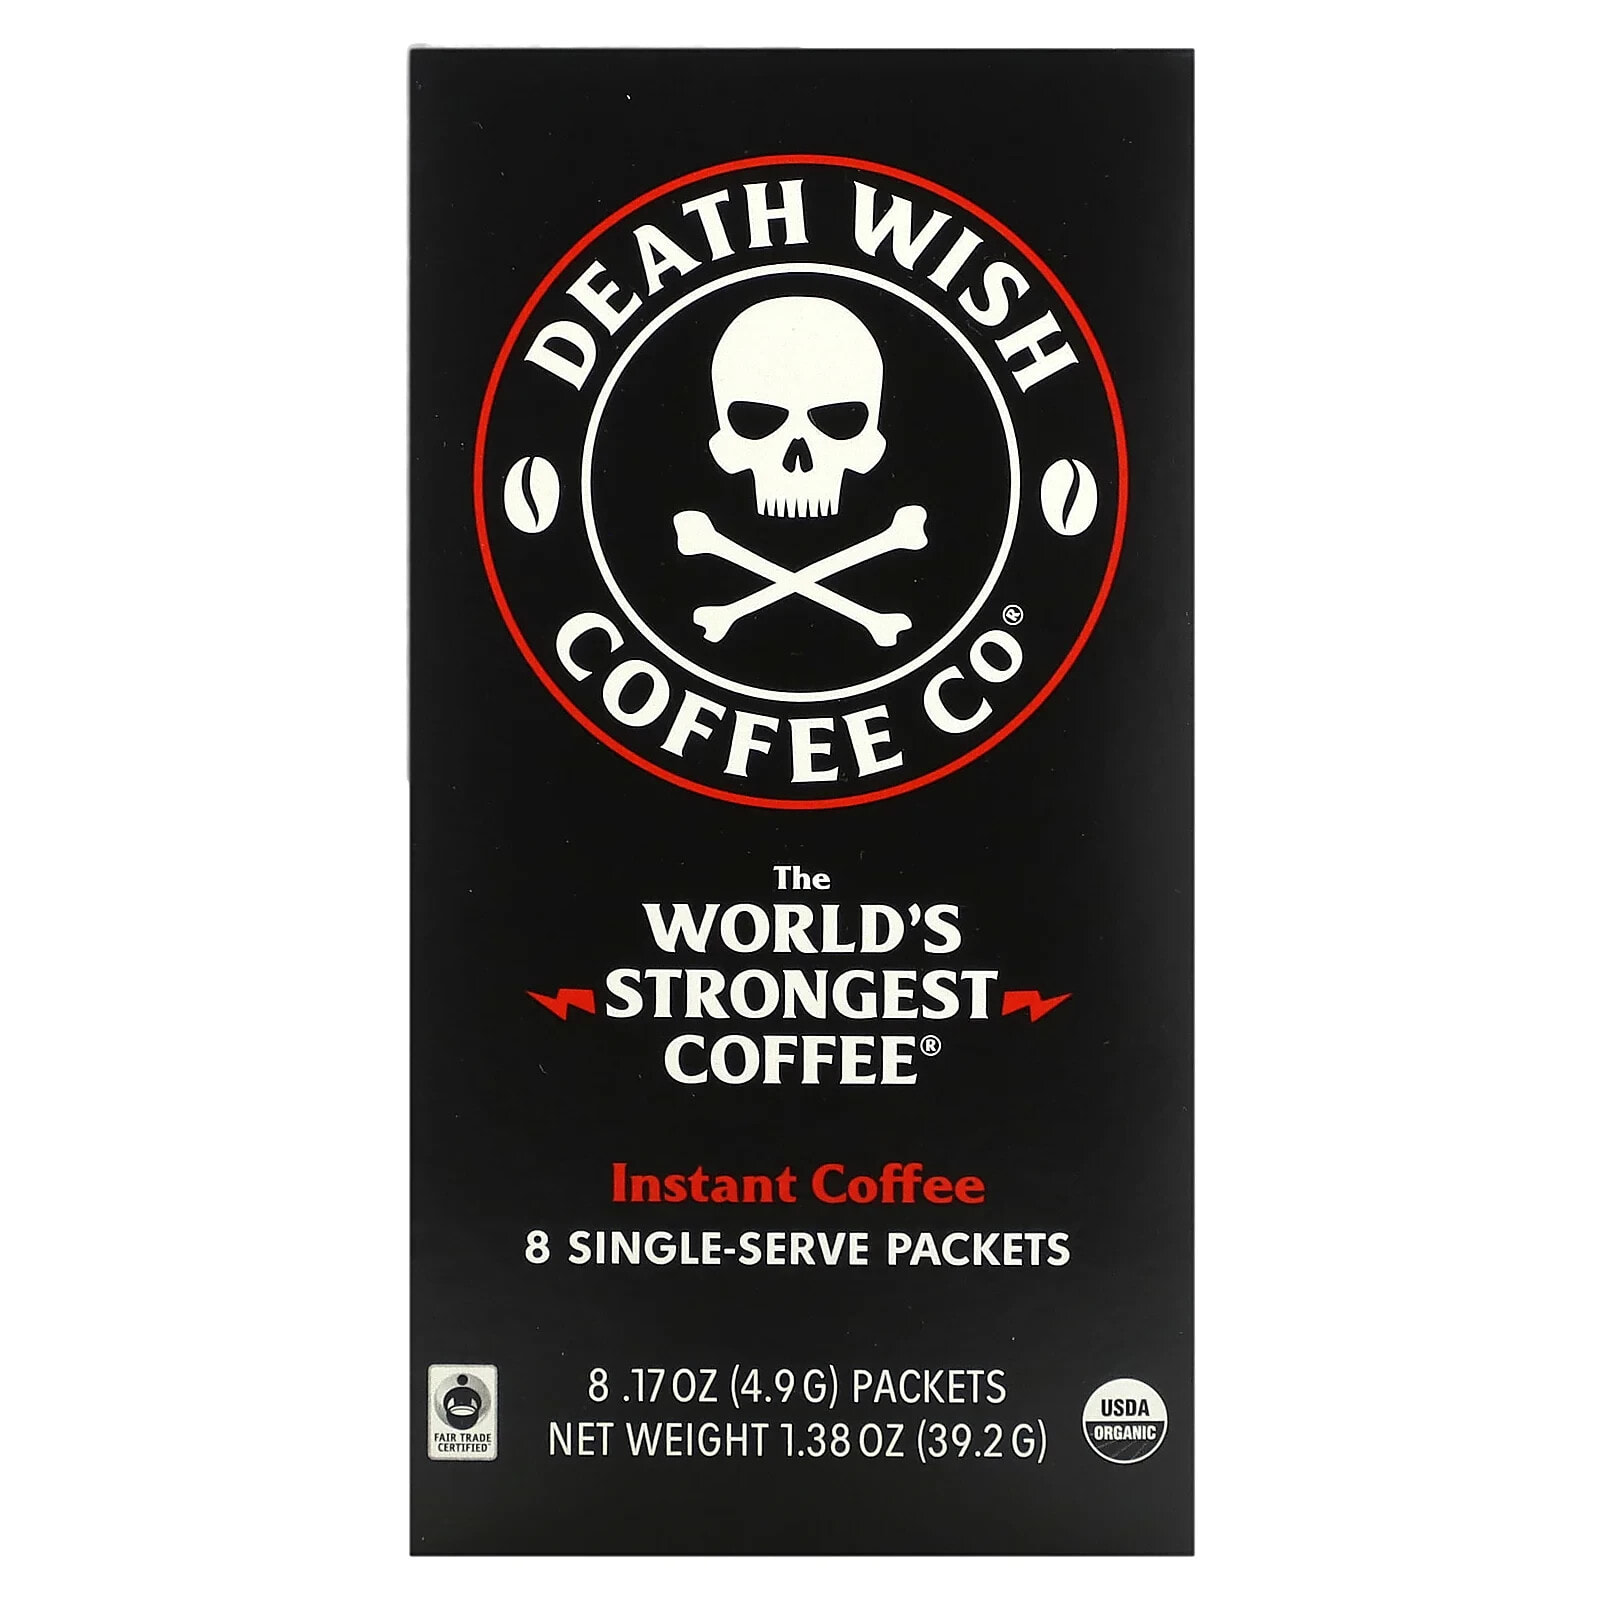 The World's Strongest Coffee, Instant Coffee, 8 Single-Serve Packets, 0.17 oz (4.9 g) Each